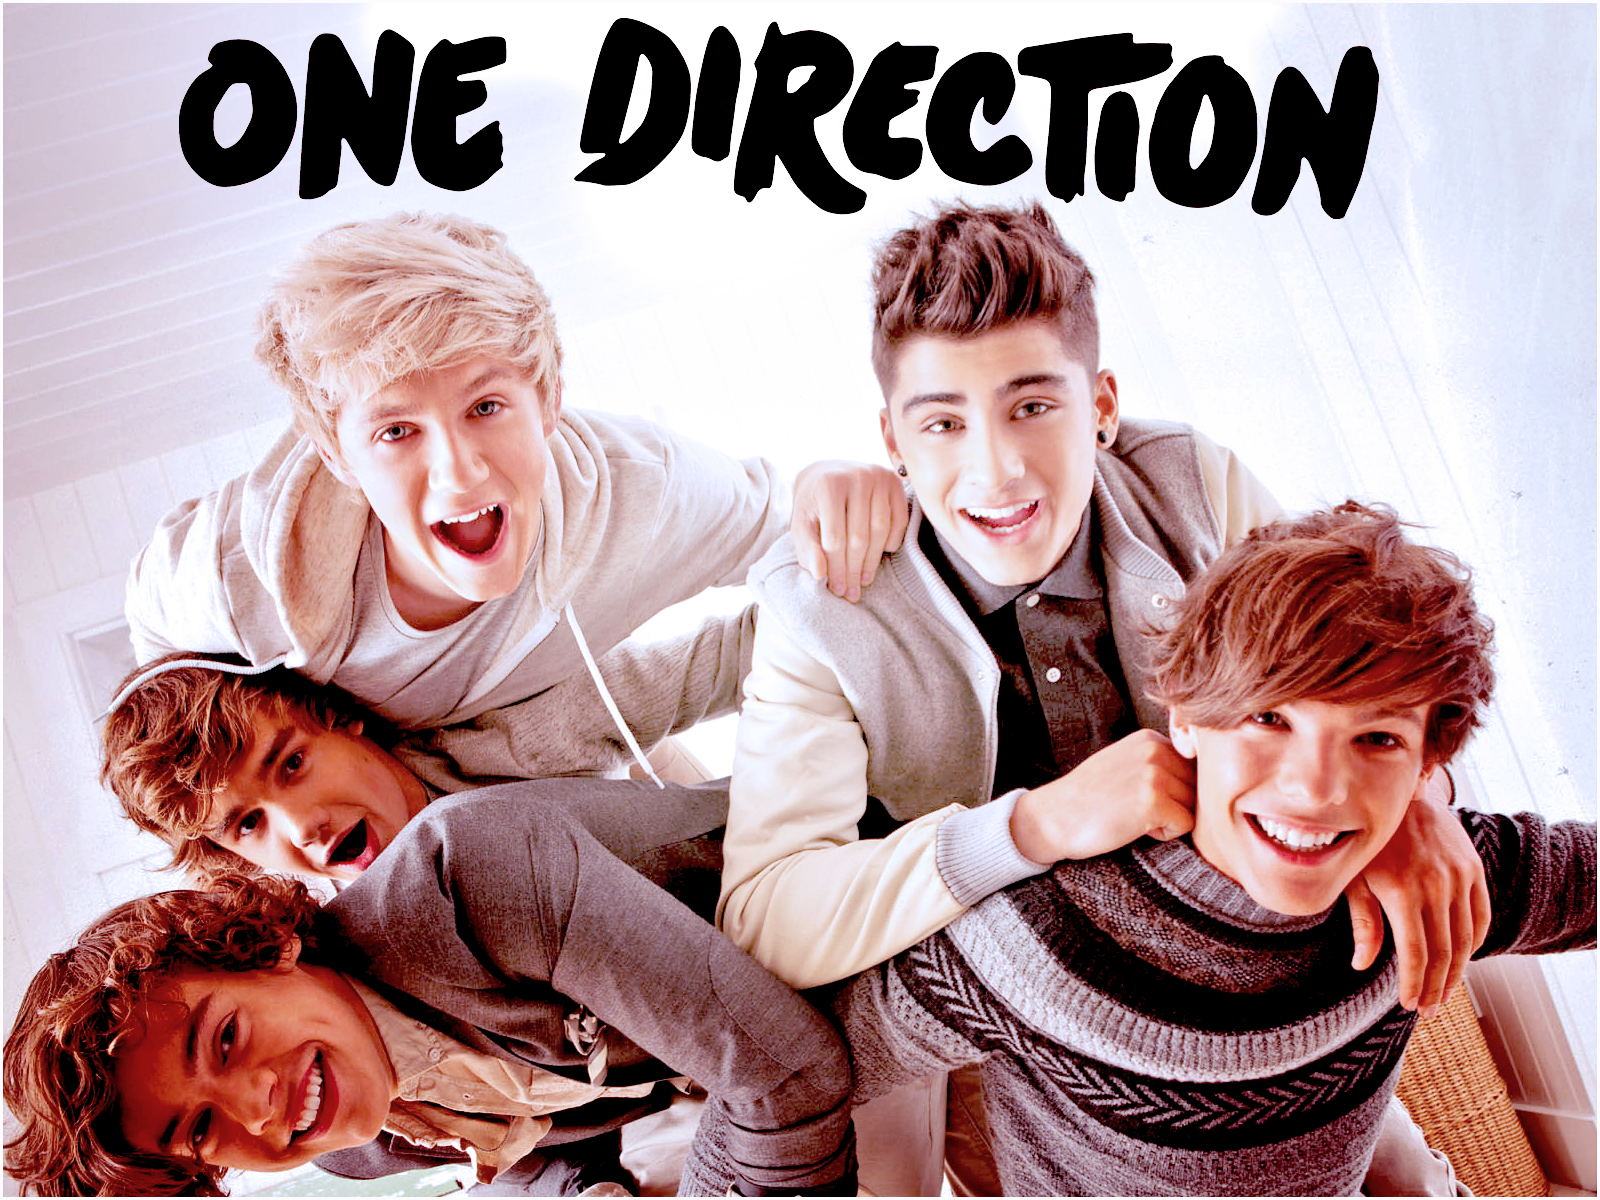 One Direction 2013 wallpaper High Quality WallpapersWallpaper